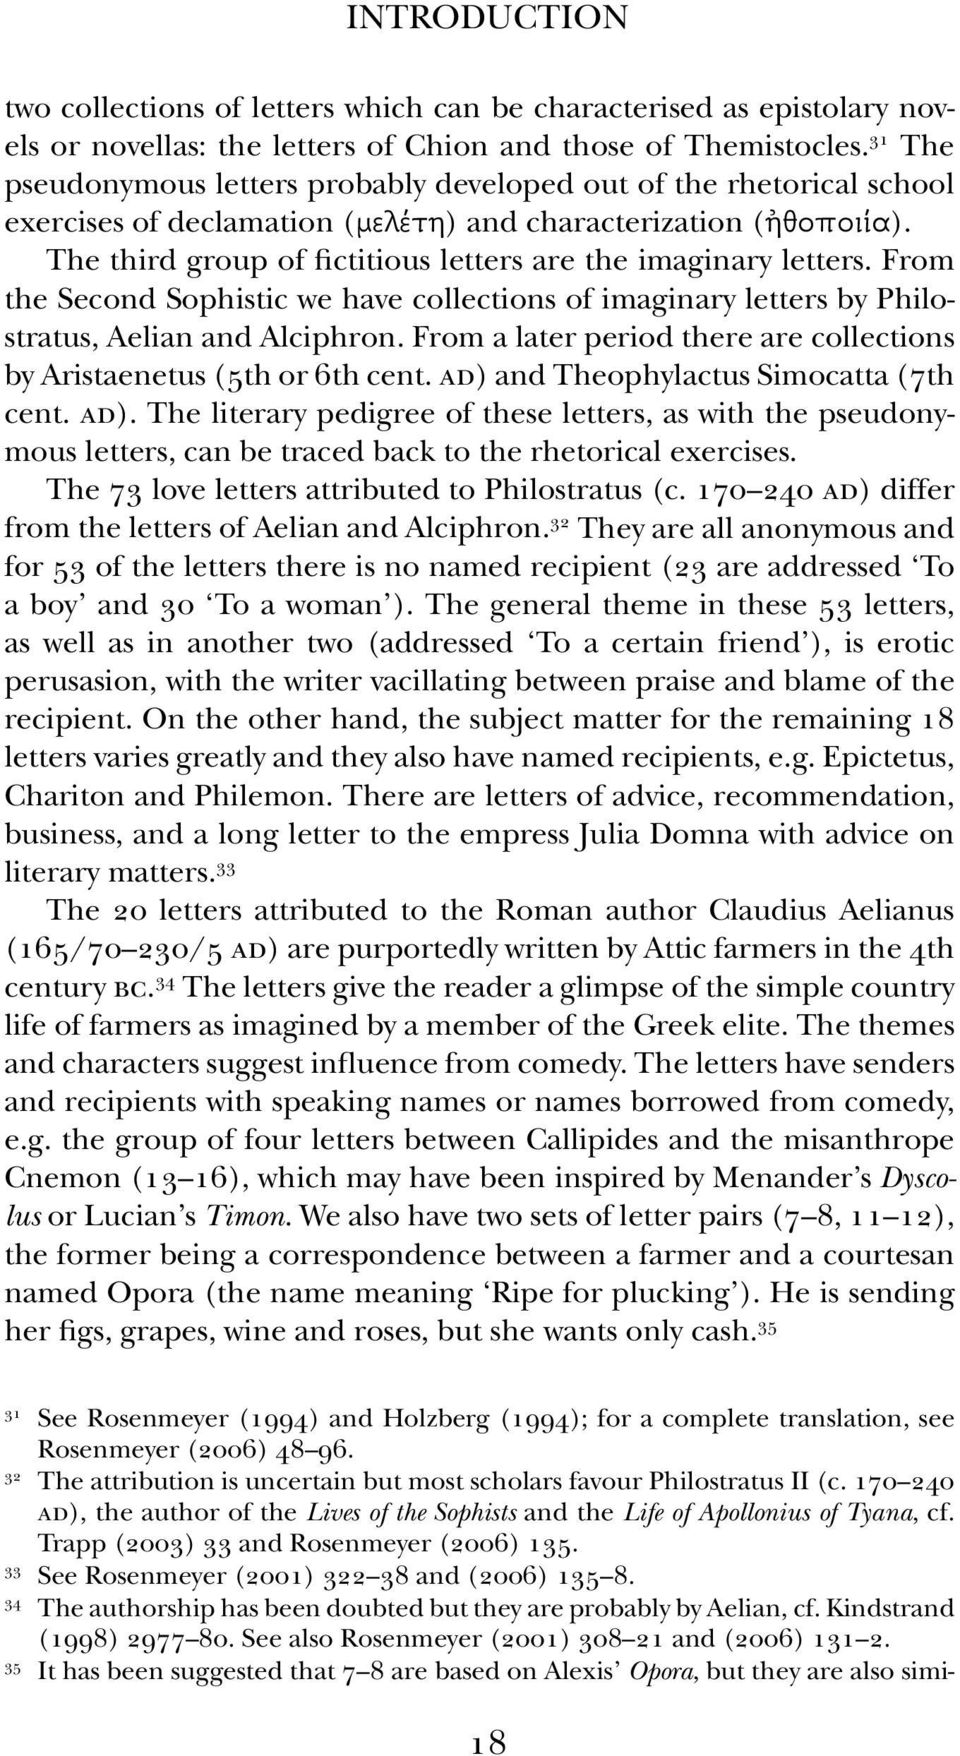 the third group of fictitious letters are the imaginary letters. from the second sophistic we have collections of imaginary letters by philostratus, Aelian and Alciphron.